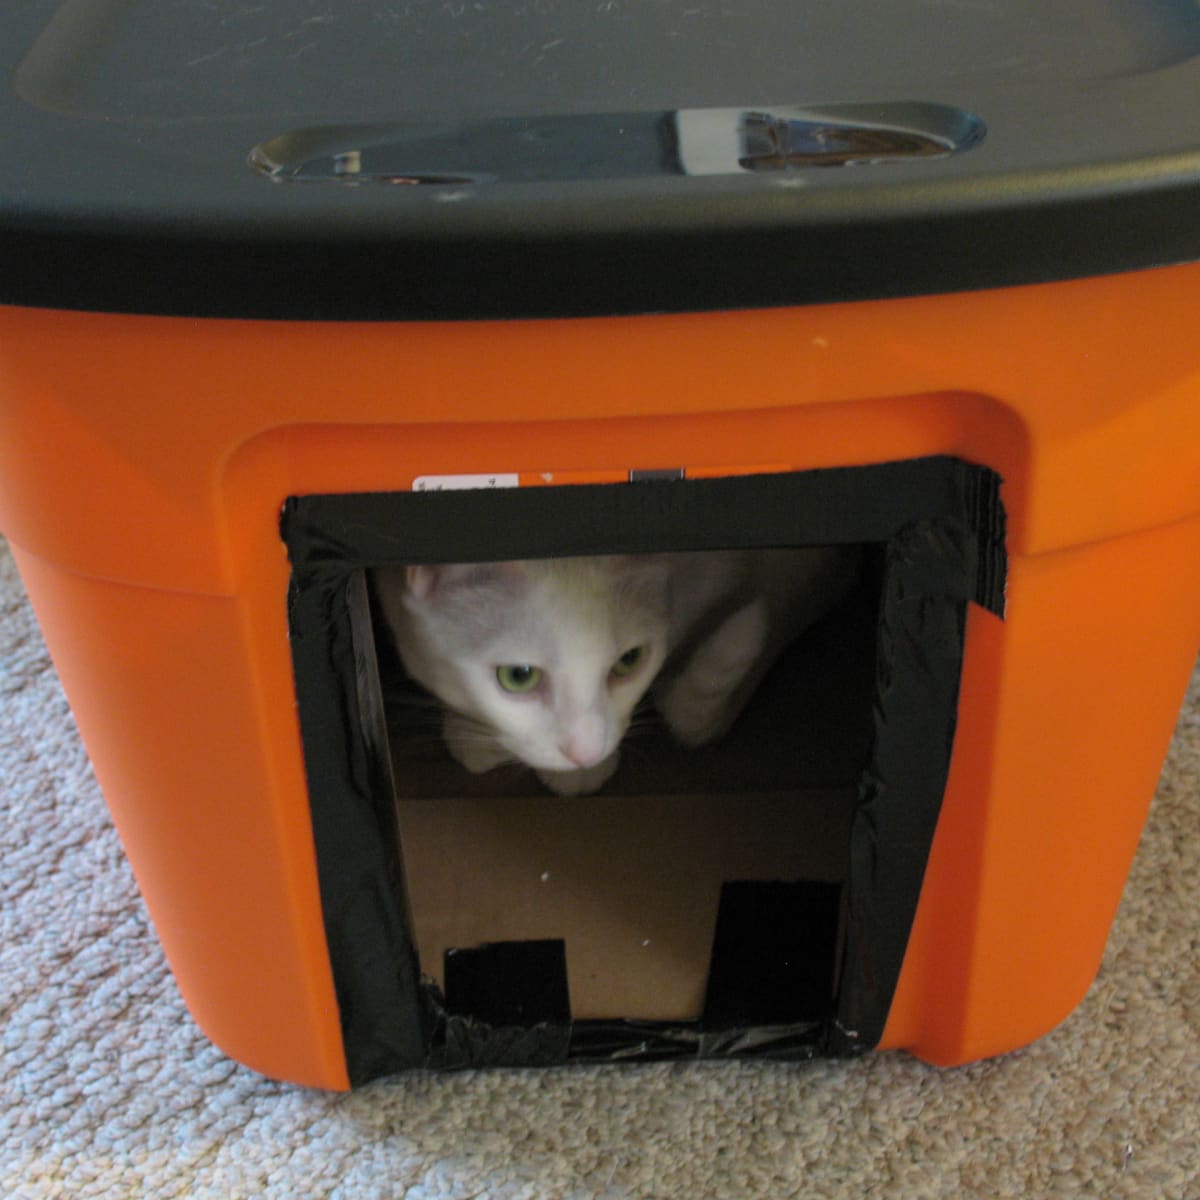 Diy feral winter cat shelter. Supplies: plastic tote, duct tape